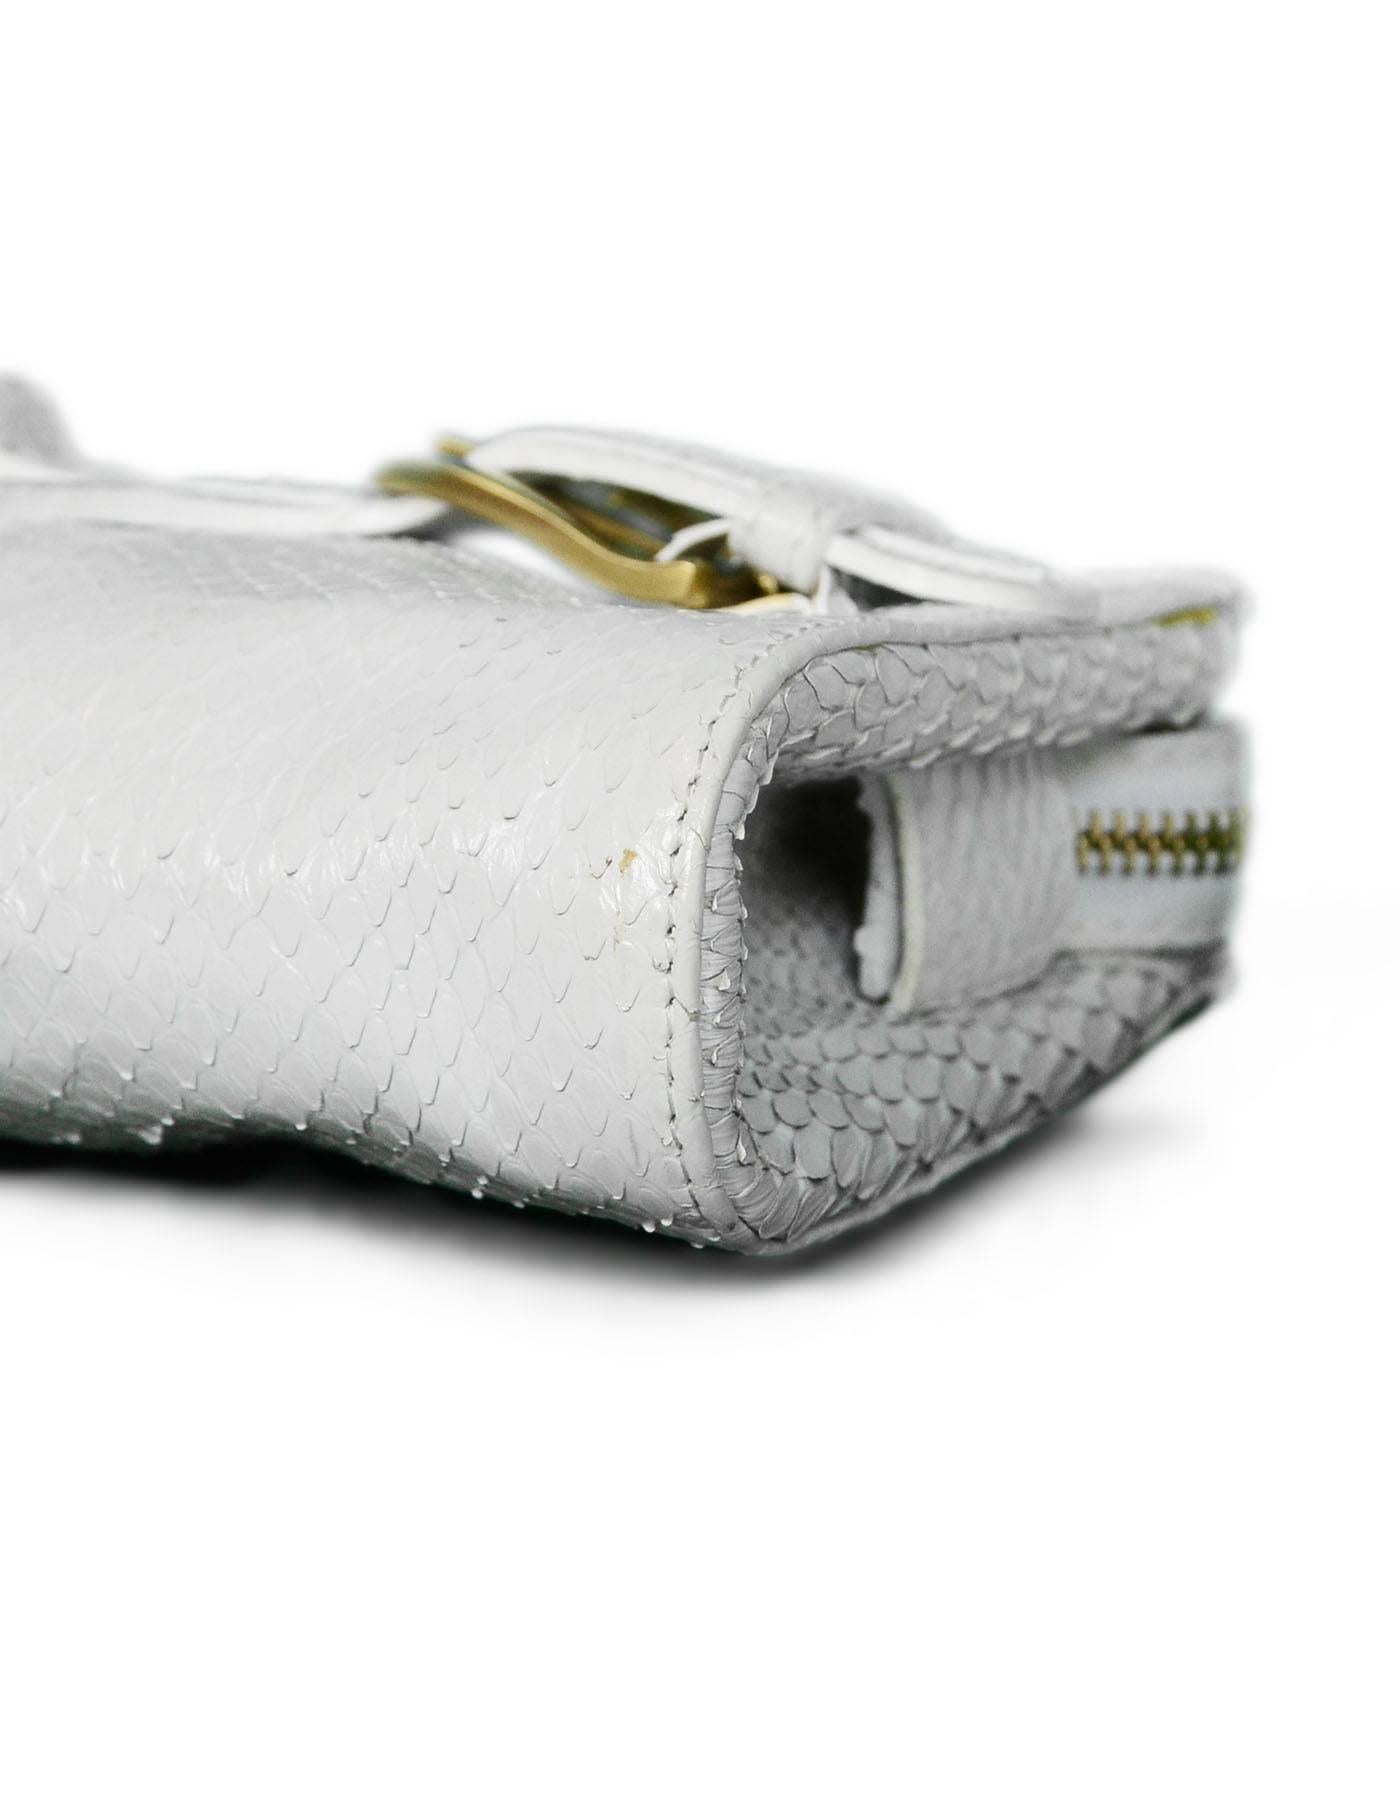 Jimmy Choo White Python Snakeskin Tulita Clutch Bag In Excellent Condition In New York, NY